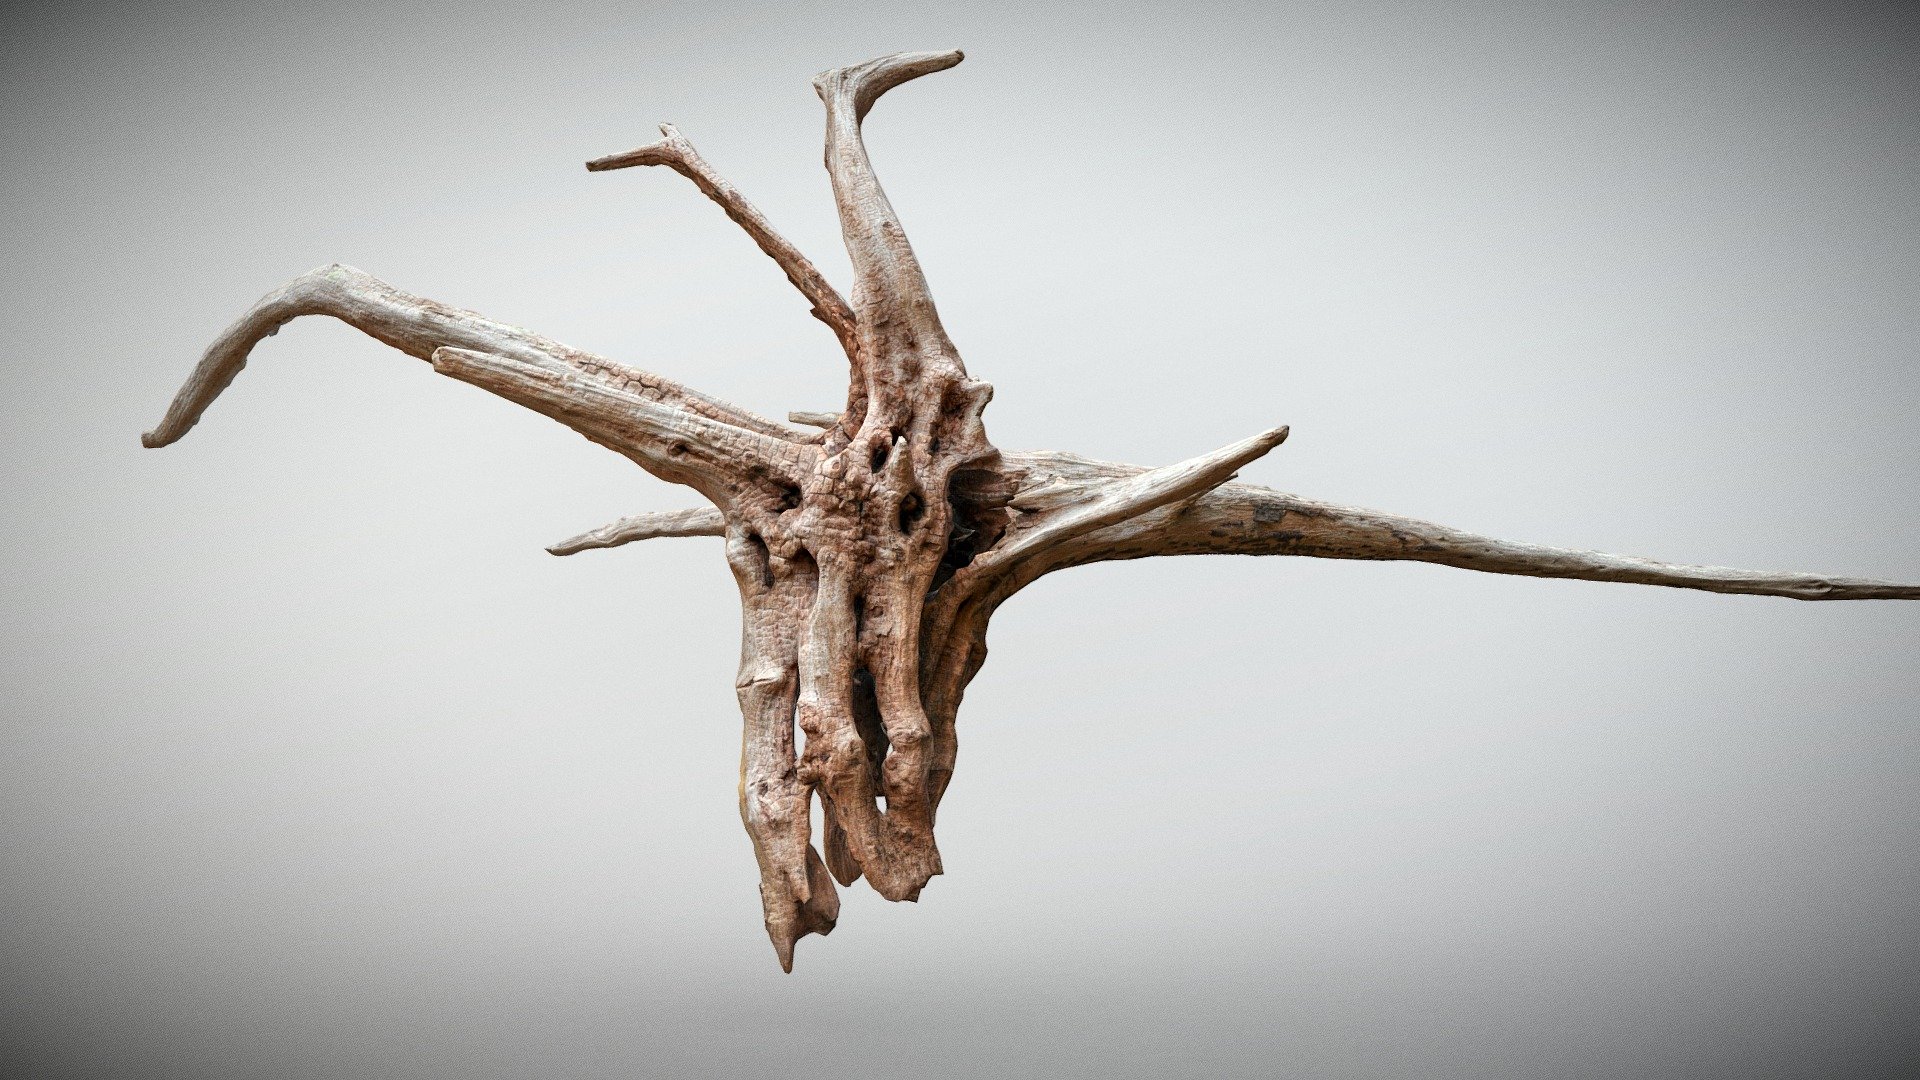 Wooden knot scanned with Reality Capture in High process than simplify in low poly with 4K textures. Look like a demonic goat skull 3d model